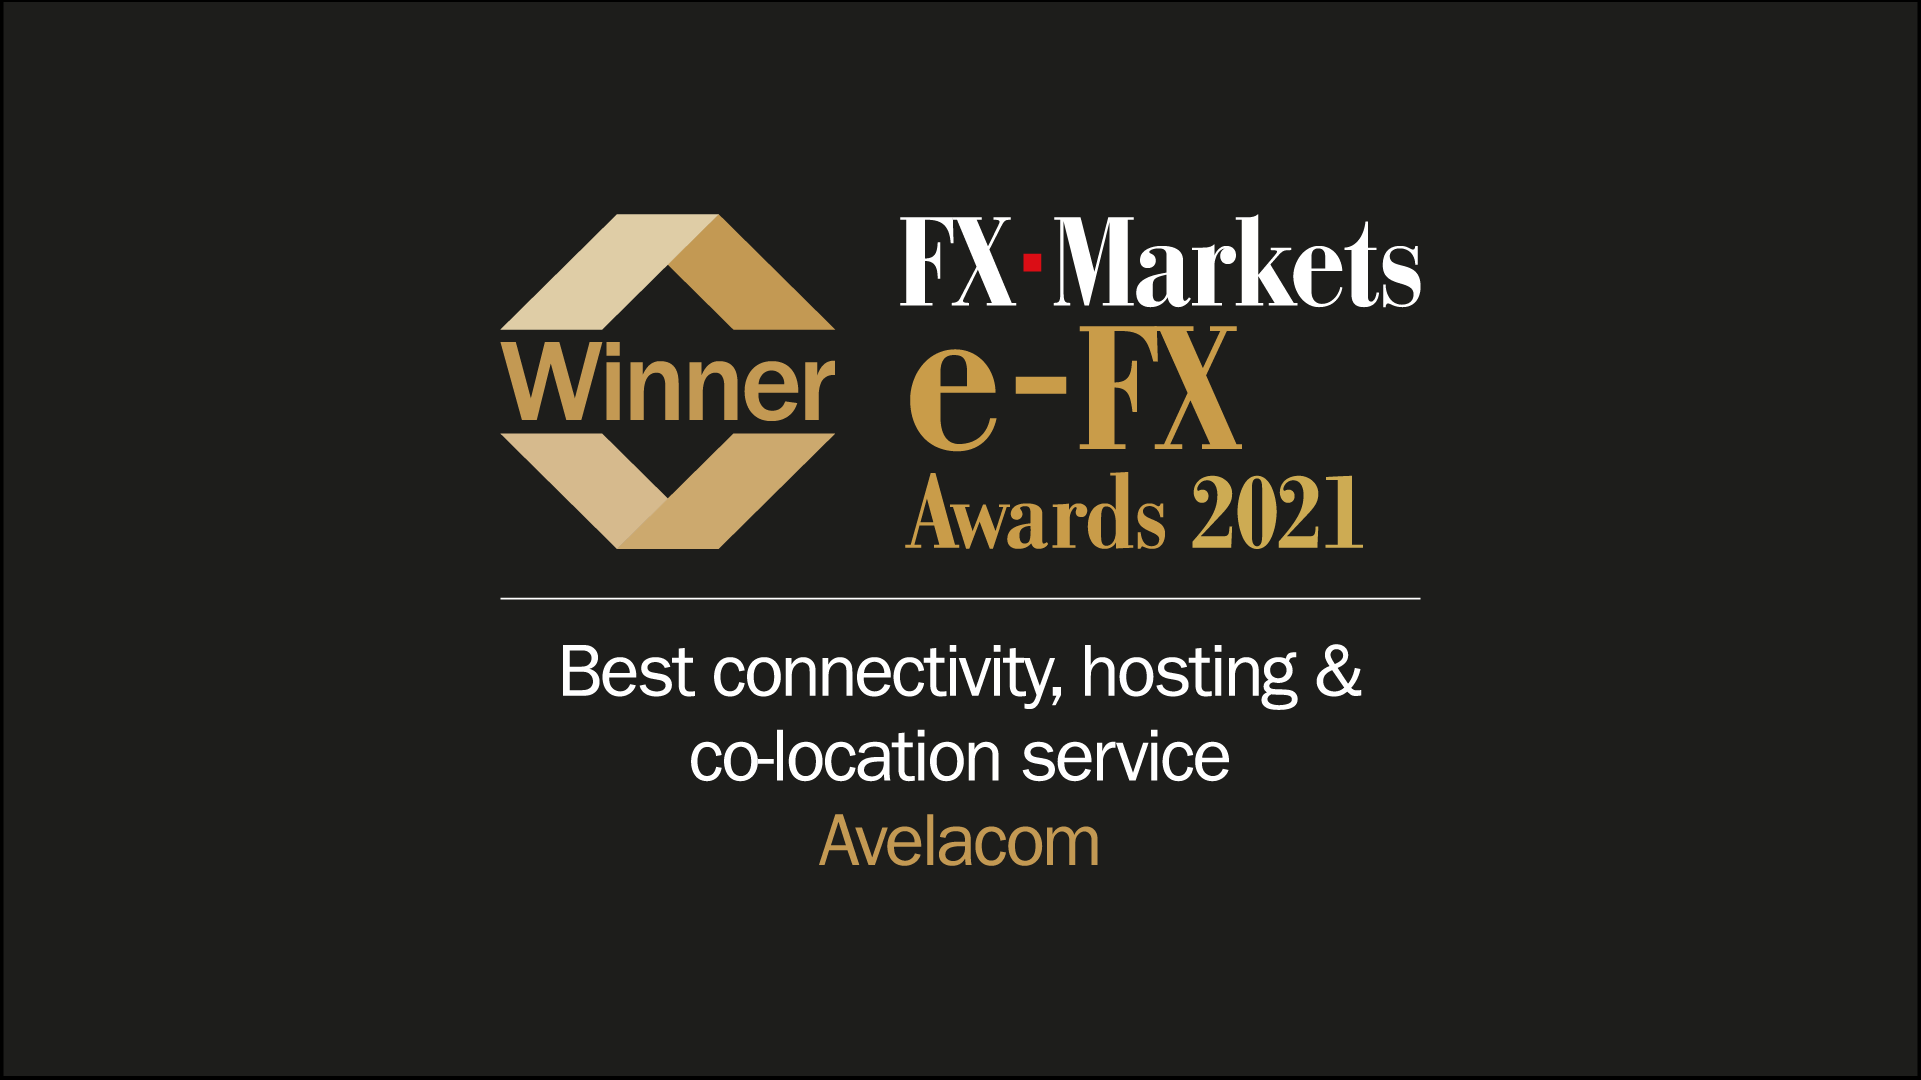 Avelacom wins FX Markets’ e-FX Award for the best connectivity, hosting and co-location services